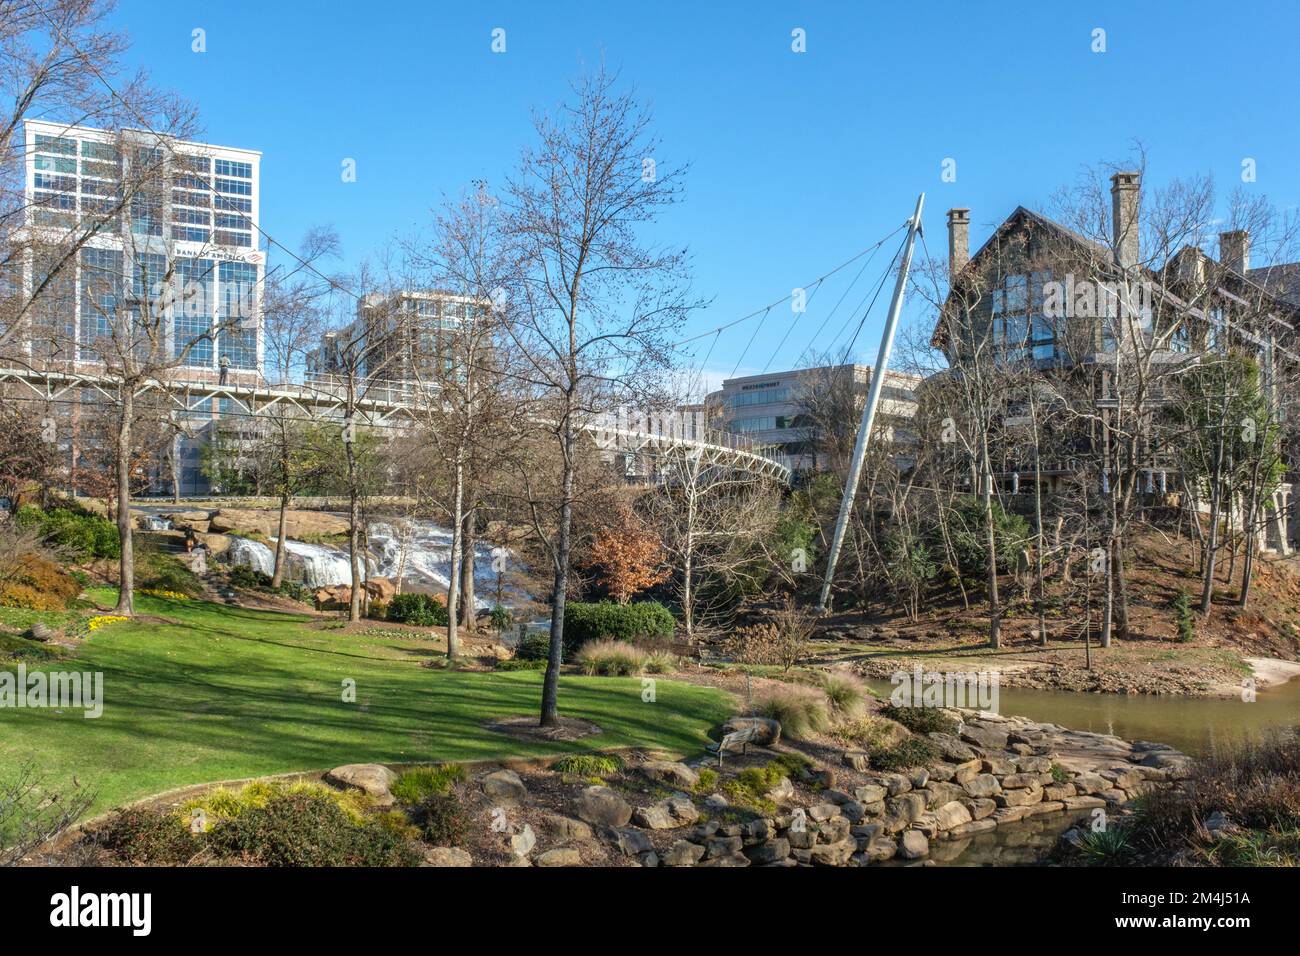 Falls Park on the Reedy view of the Liberty Bridge and downtown Greenville, South Carolina buildings Stock Photo